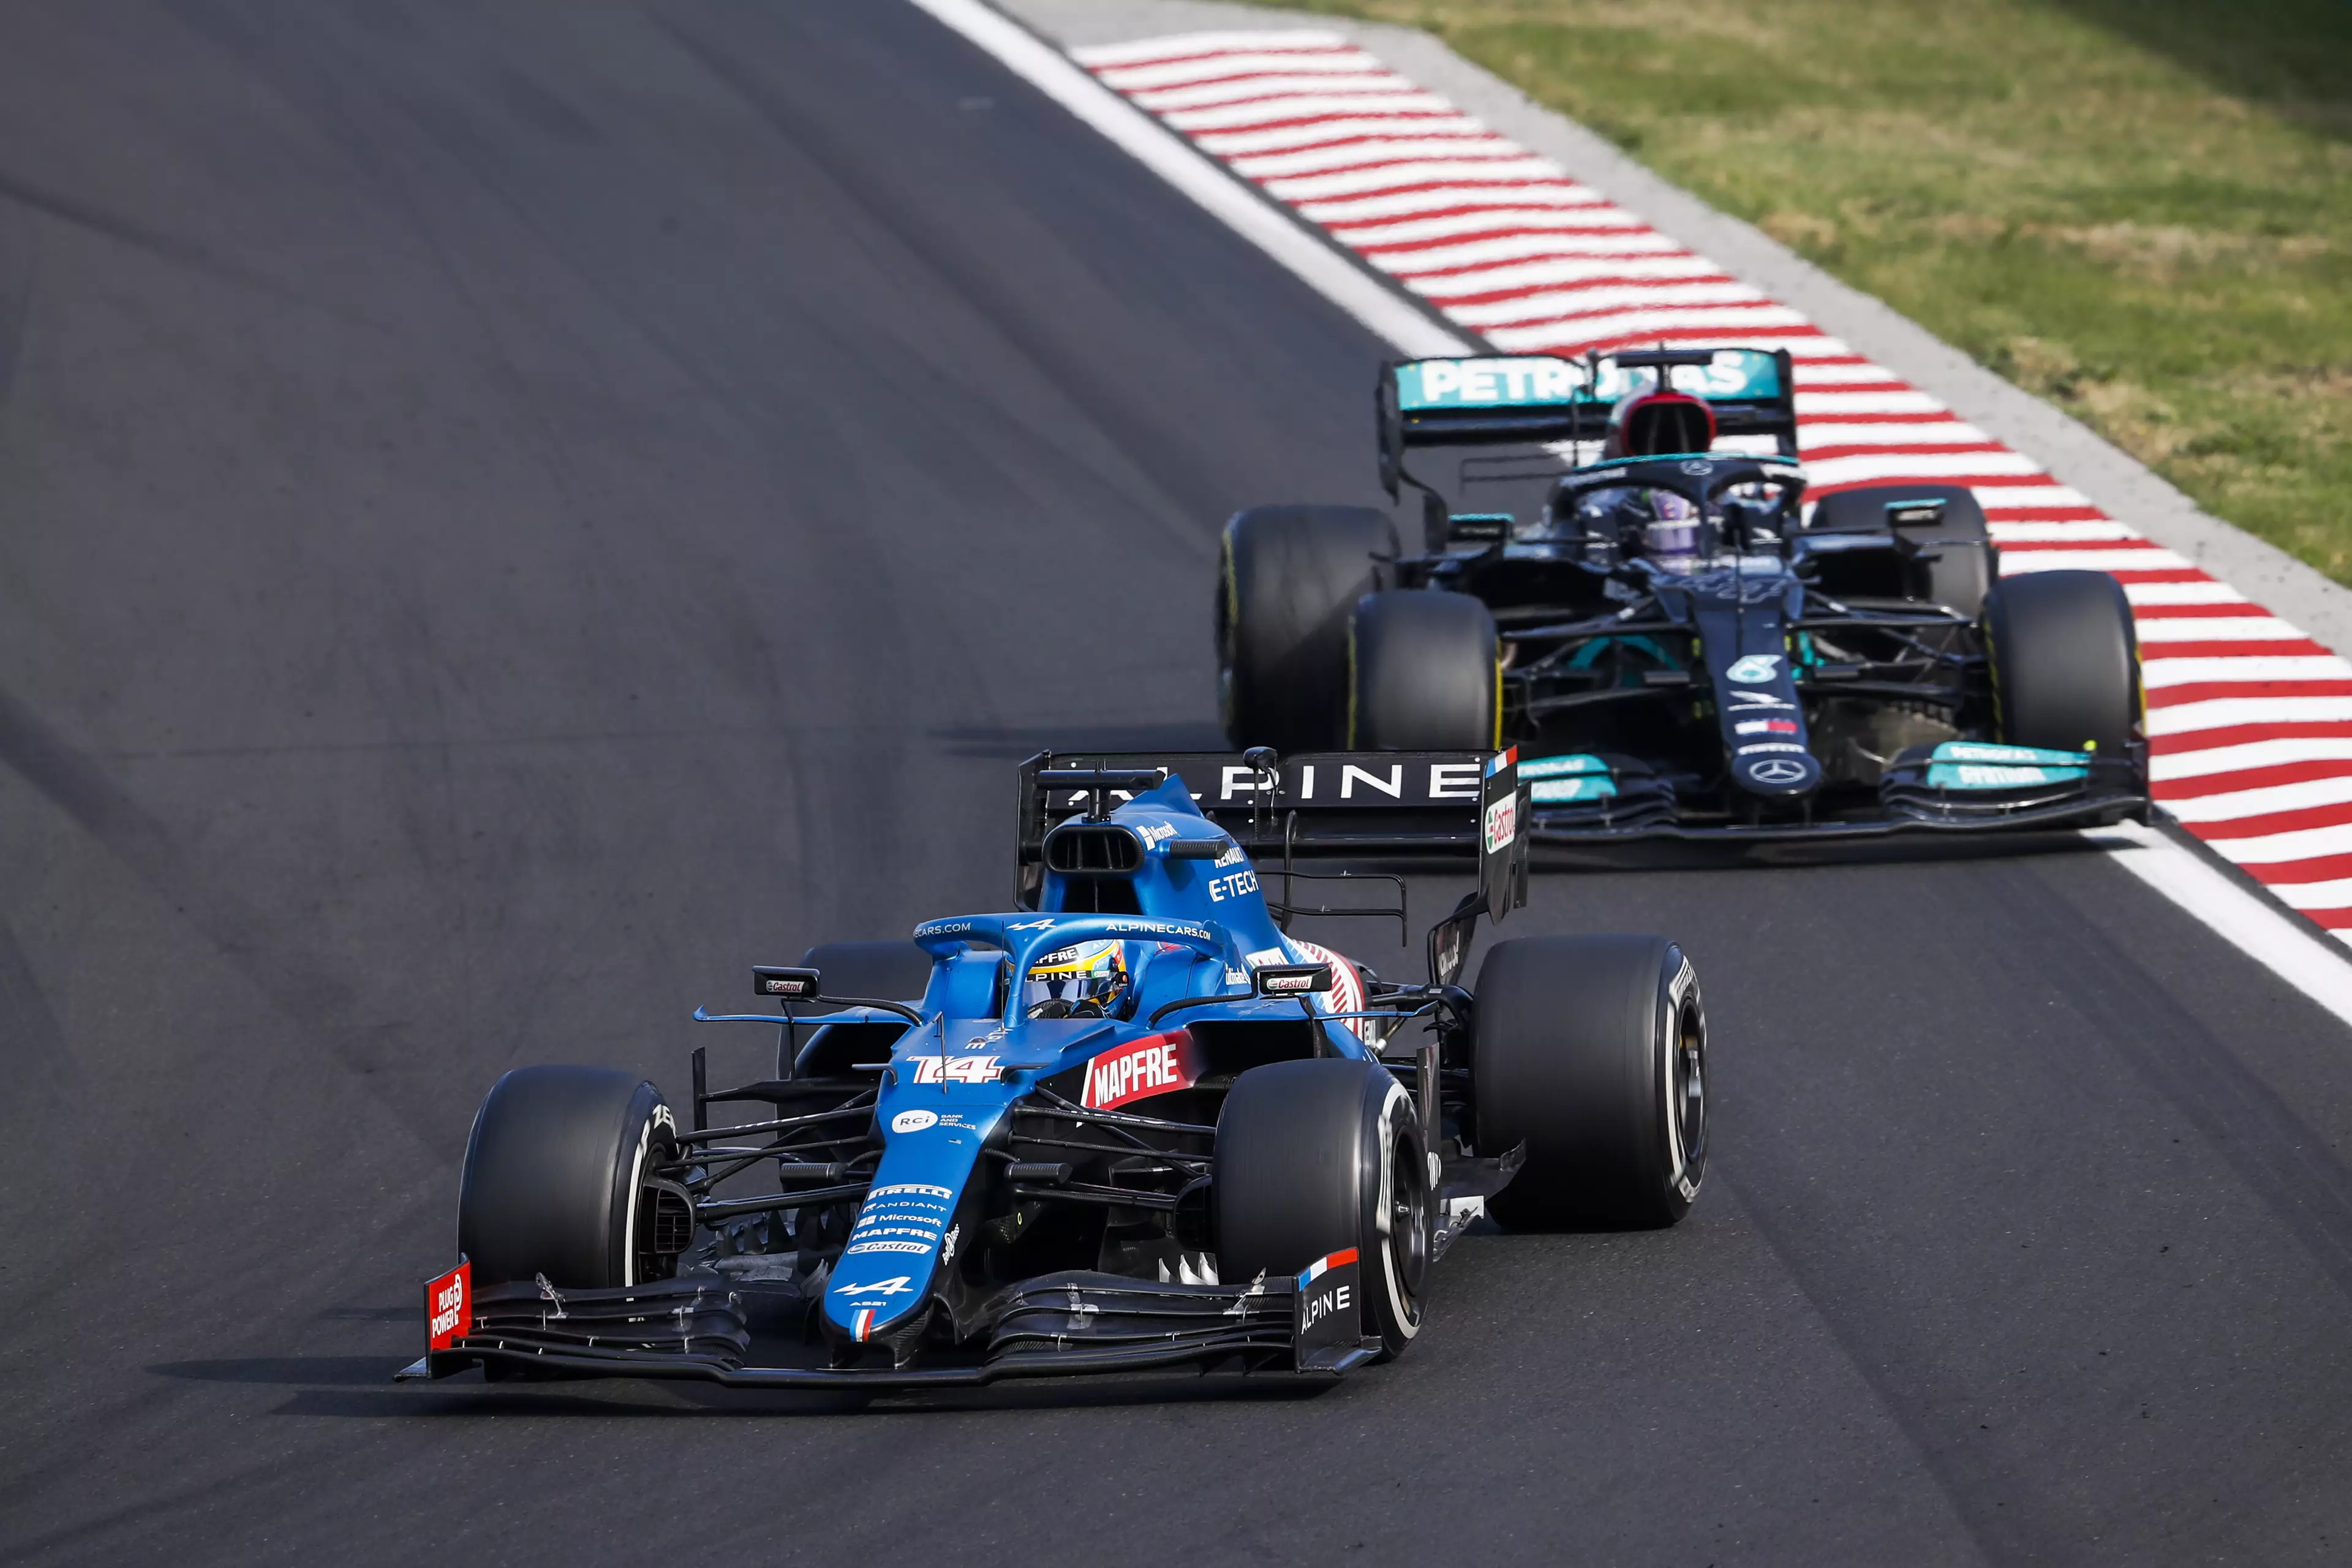 Hamilton's battle with Alonso made for brilliant viewing. Image: PA Images